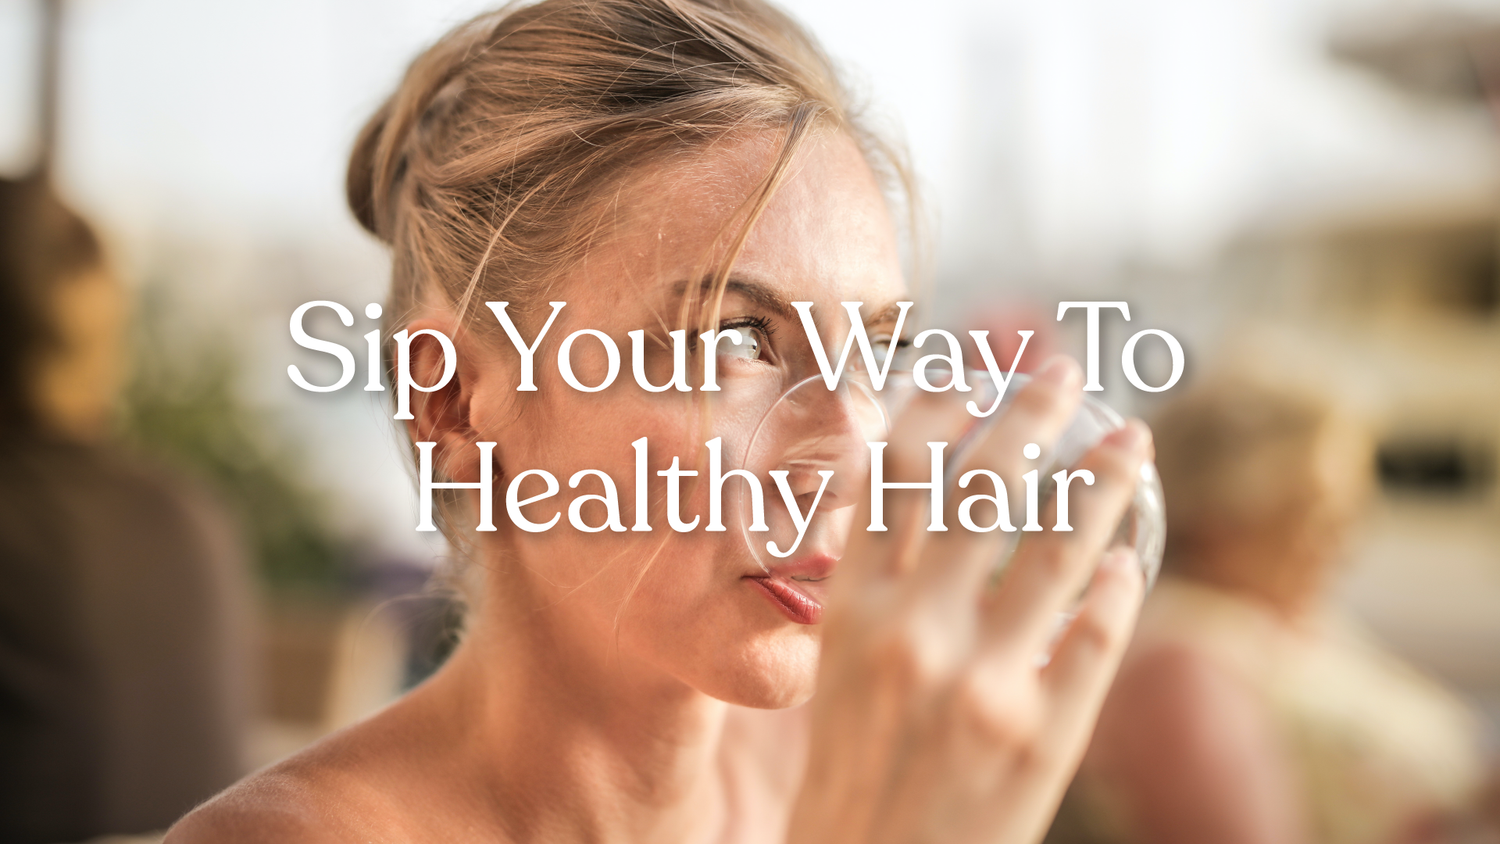 hairmosa sip your way to healthy hair banner